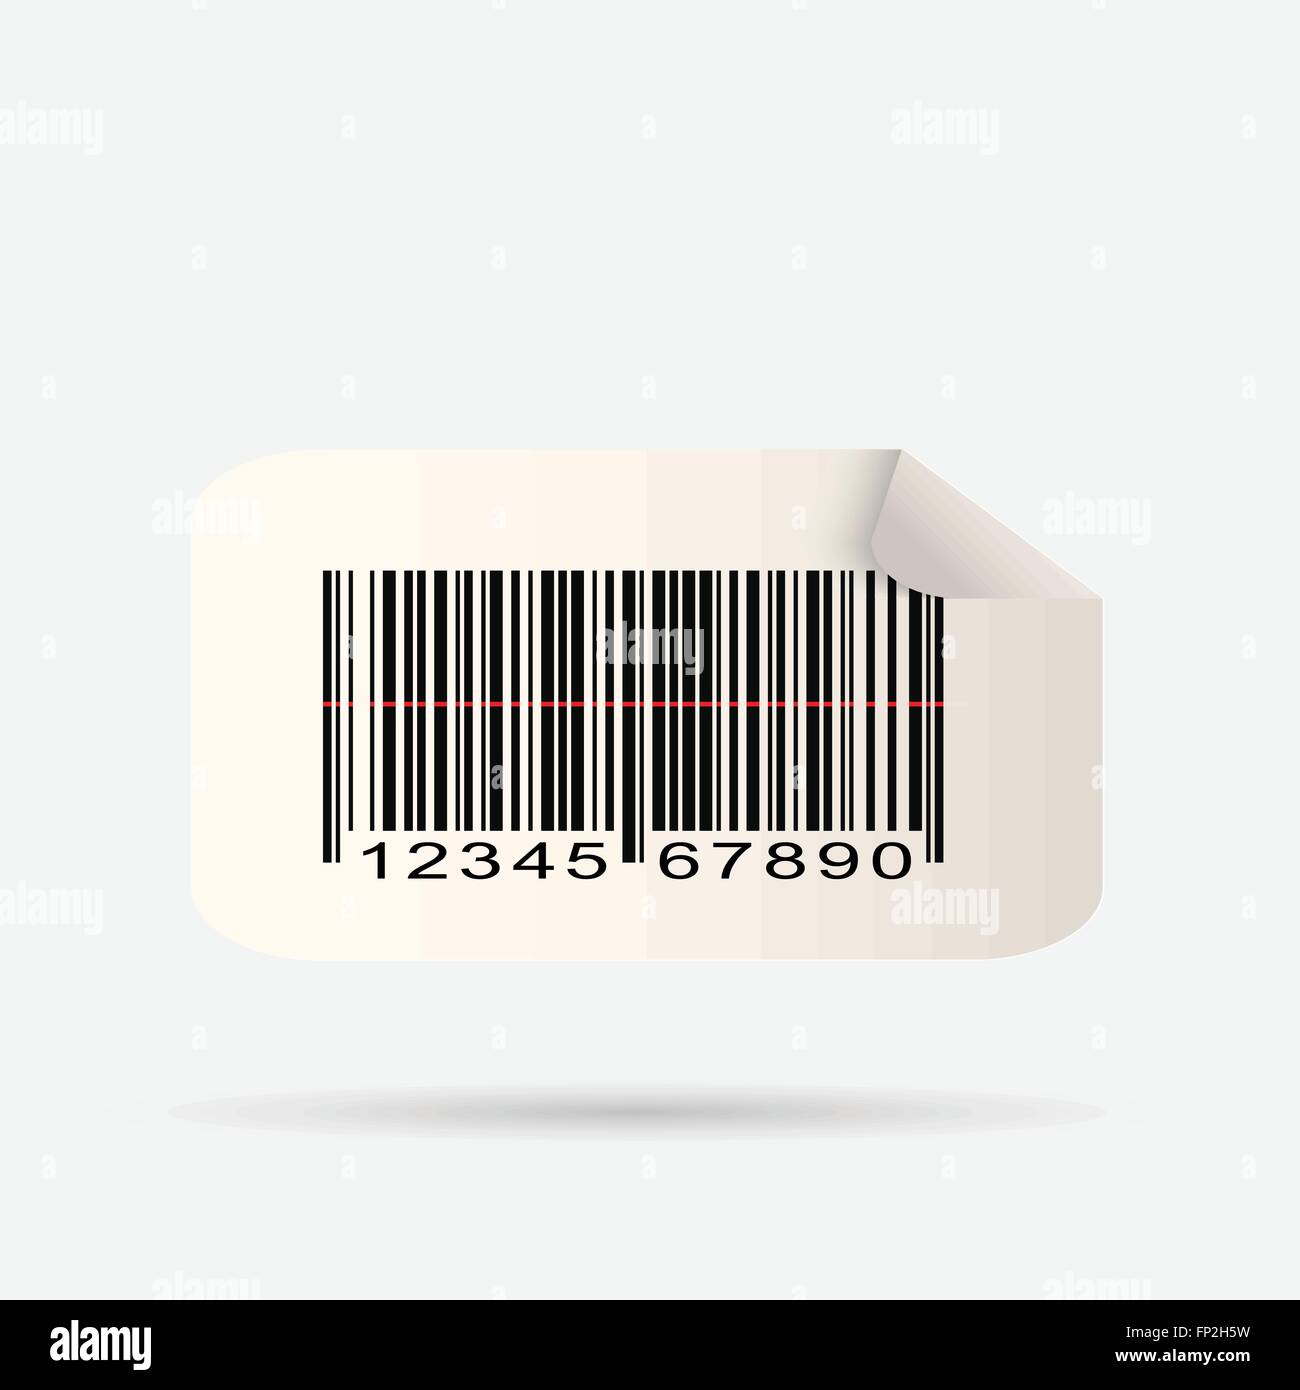 Illustration of a barcode sticker isolated on a white background. Stock Vector